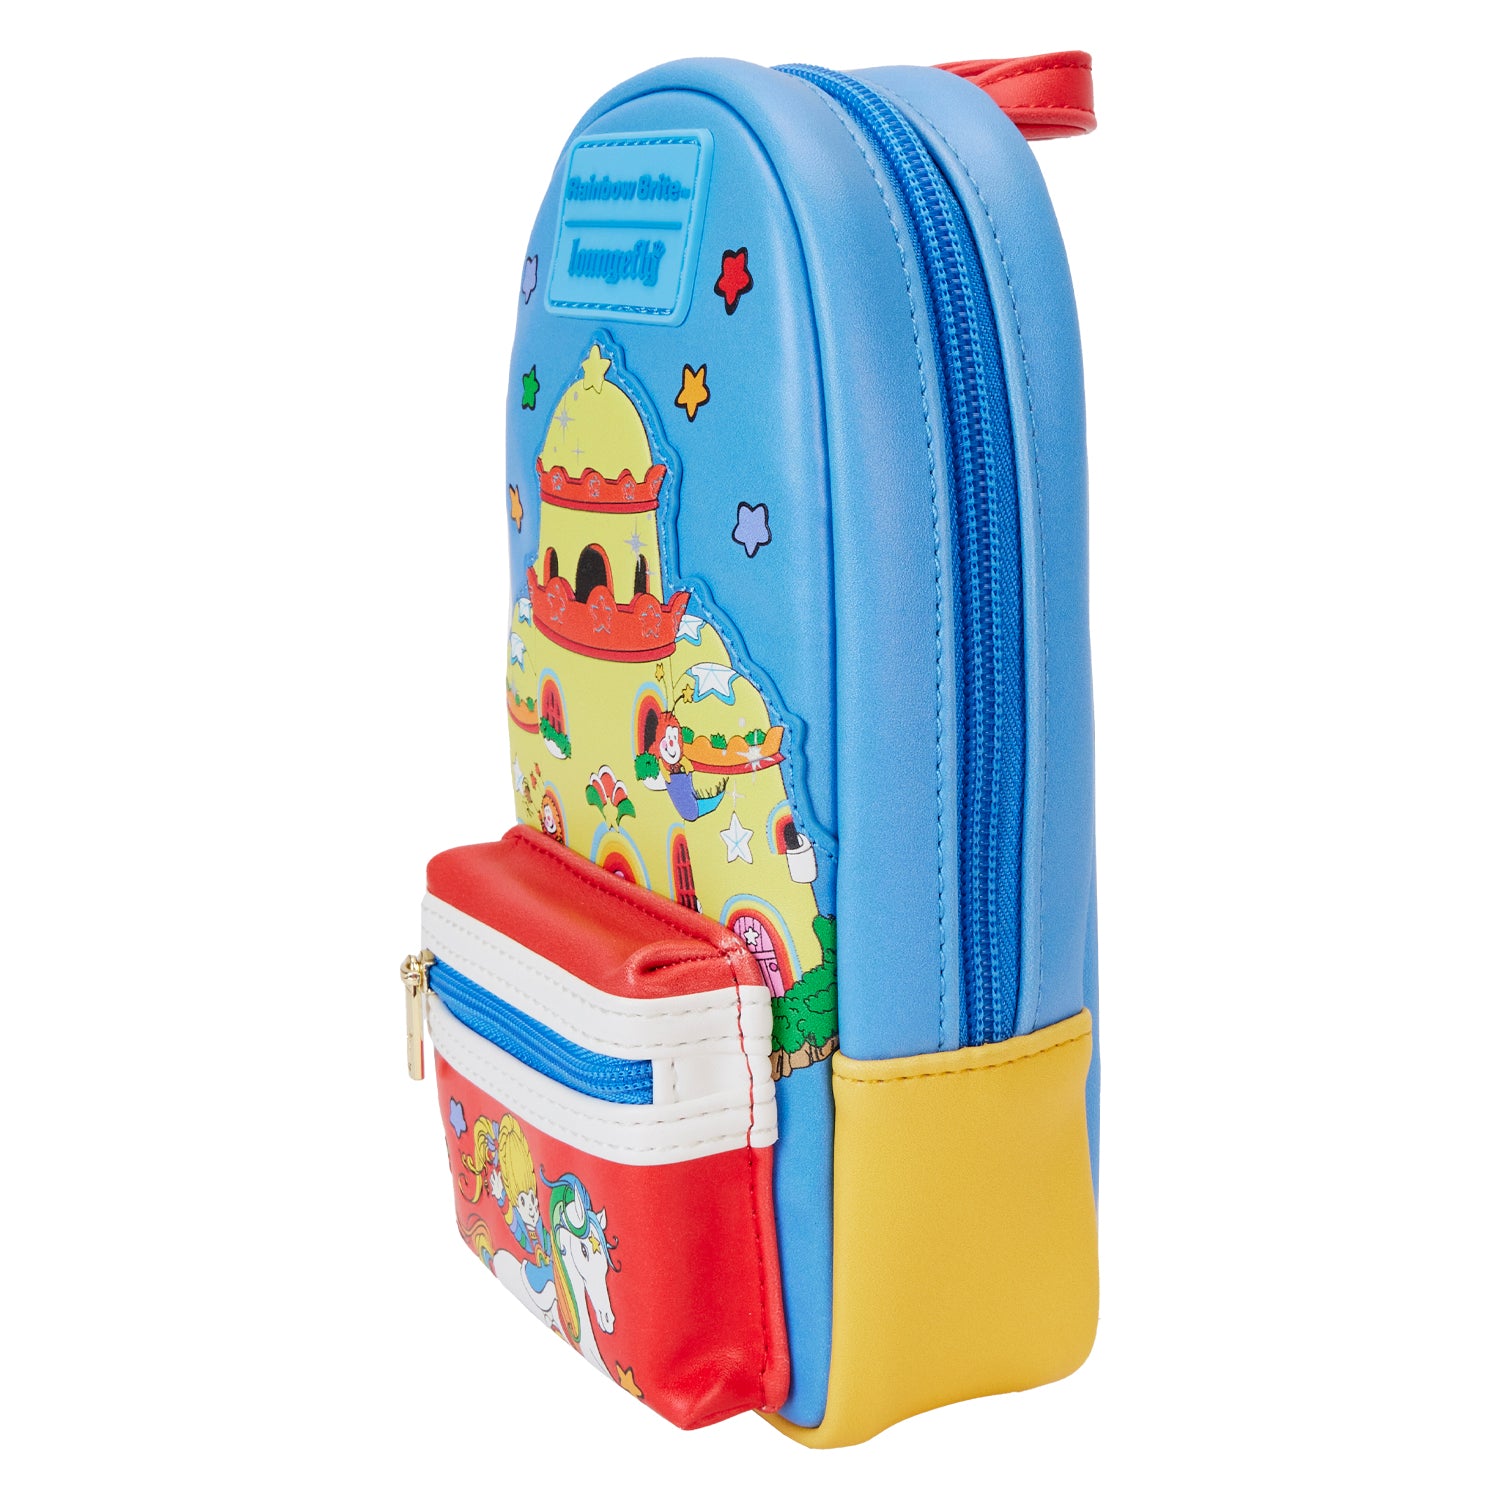 Loungefly Rainbow Brite Castle Mini Backpack Pencil Case